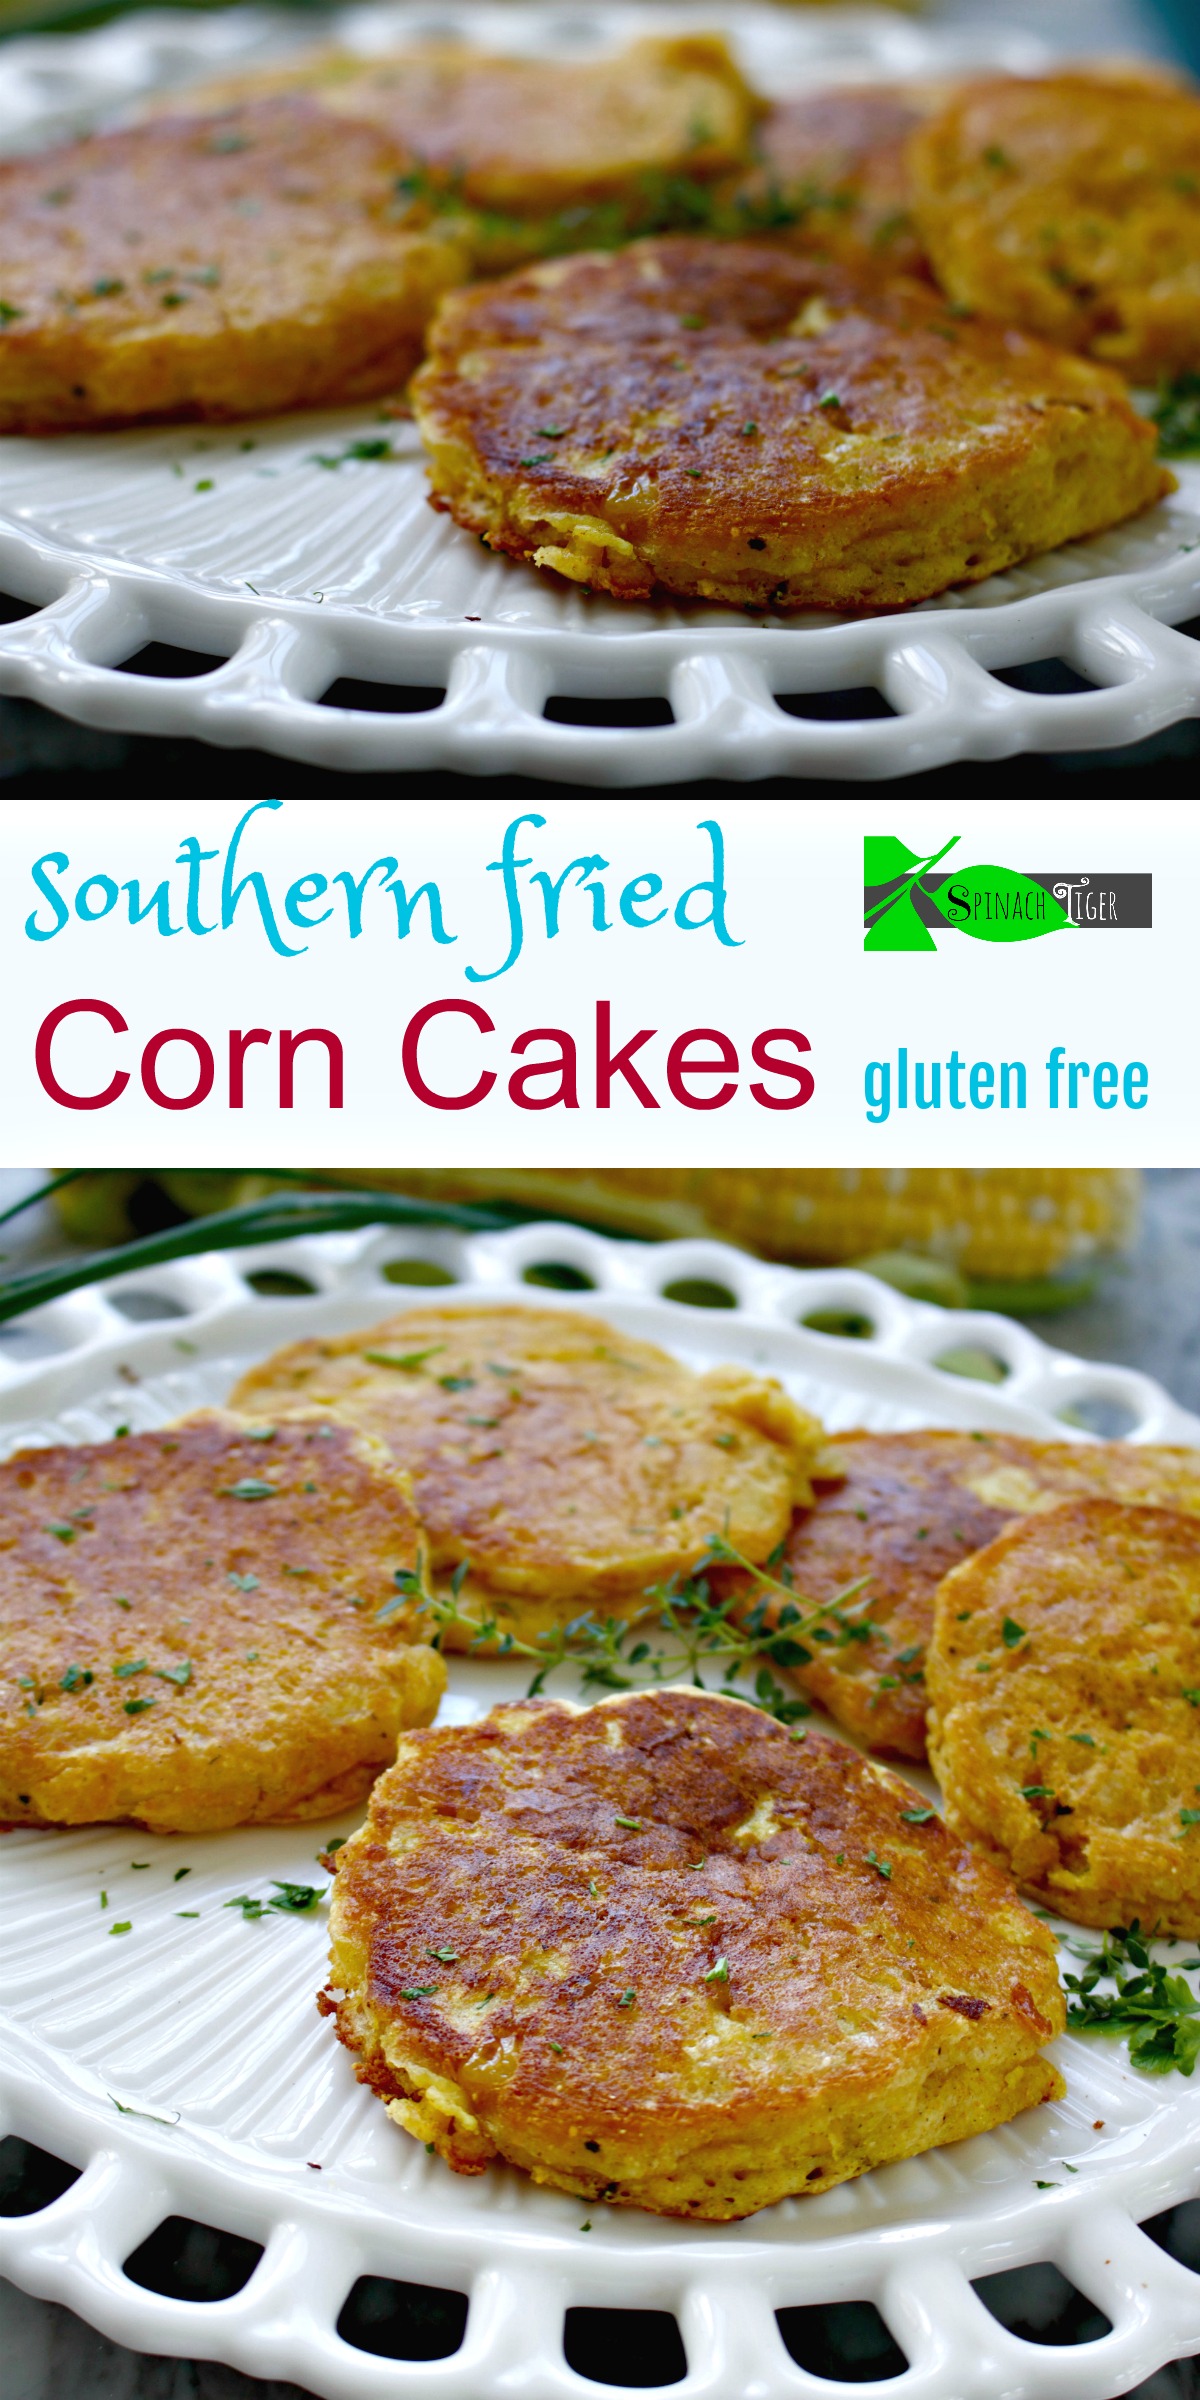 Southern Fried Corn Cakes (Gluten Free Option) - Spinach Tiger